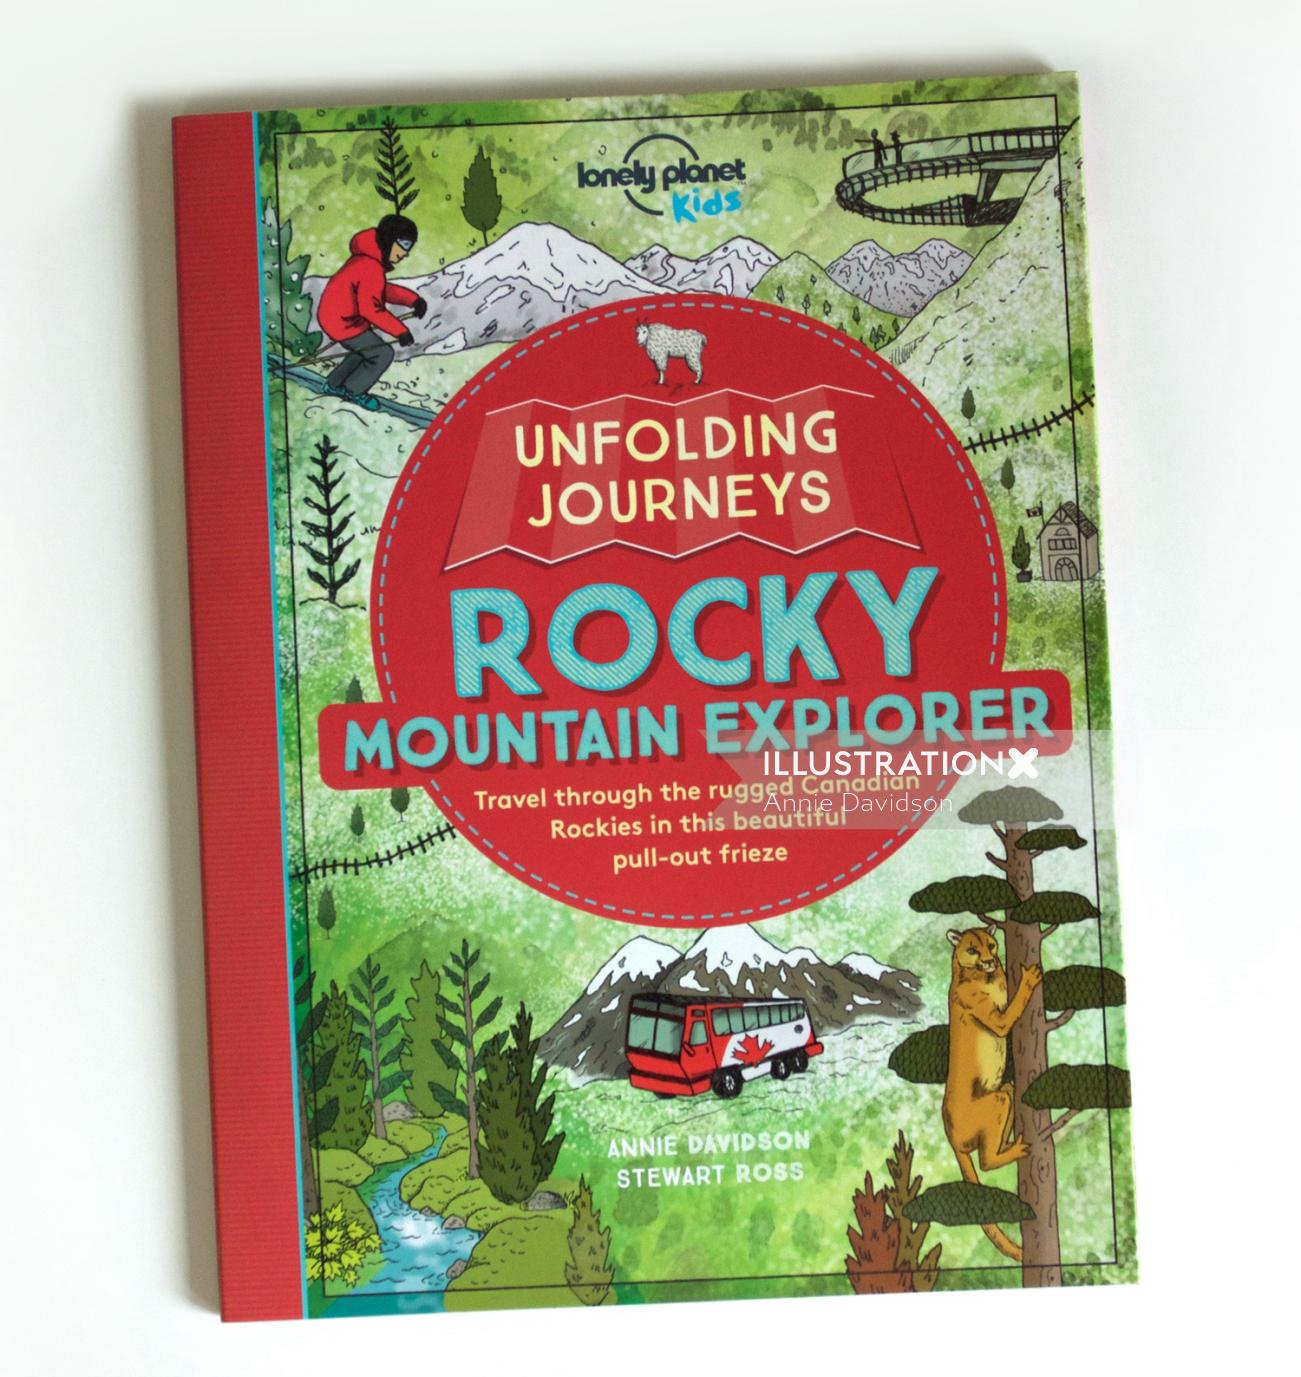 Book cover illustration of rocky mountain explorer